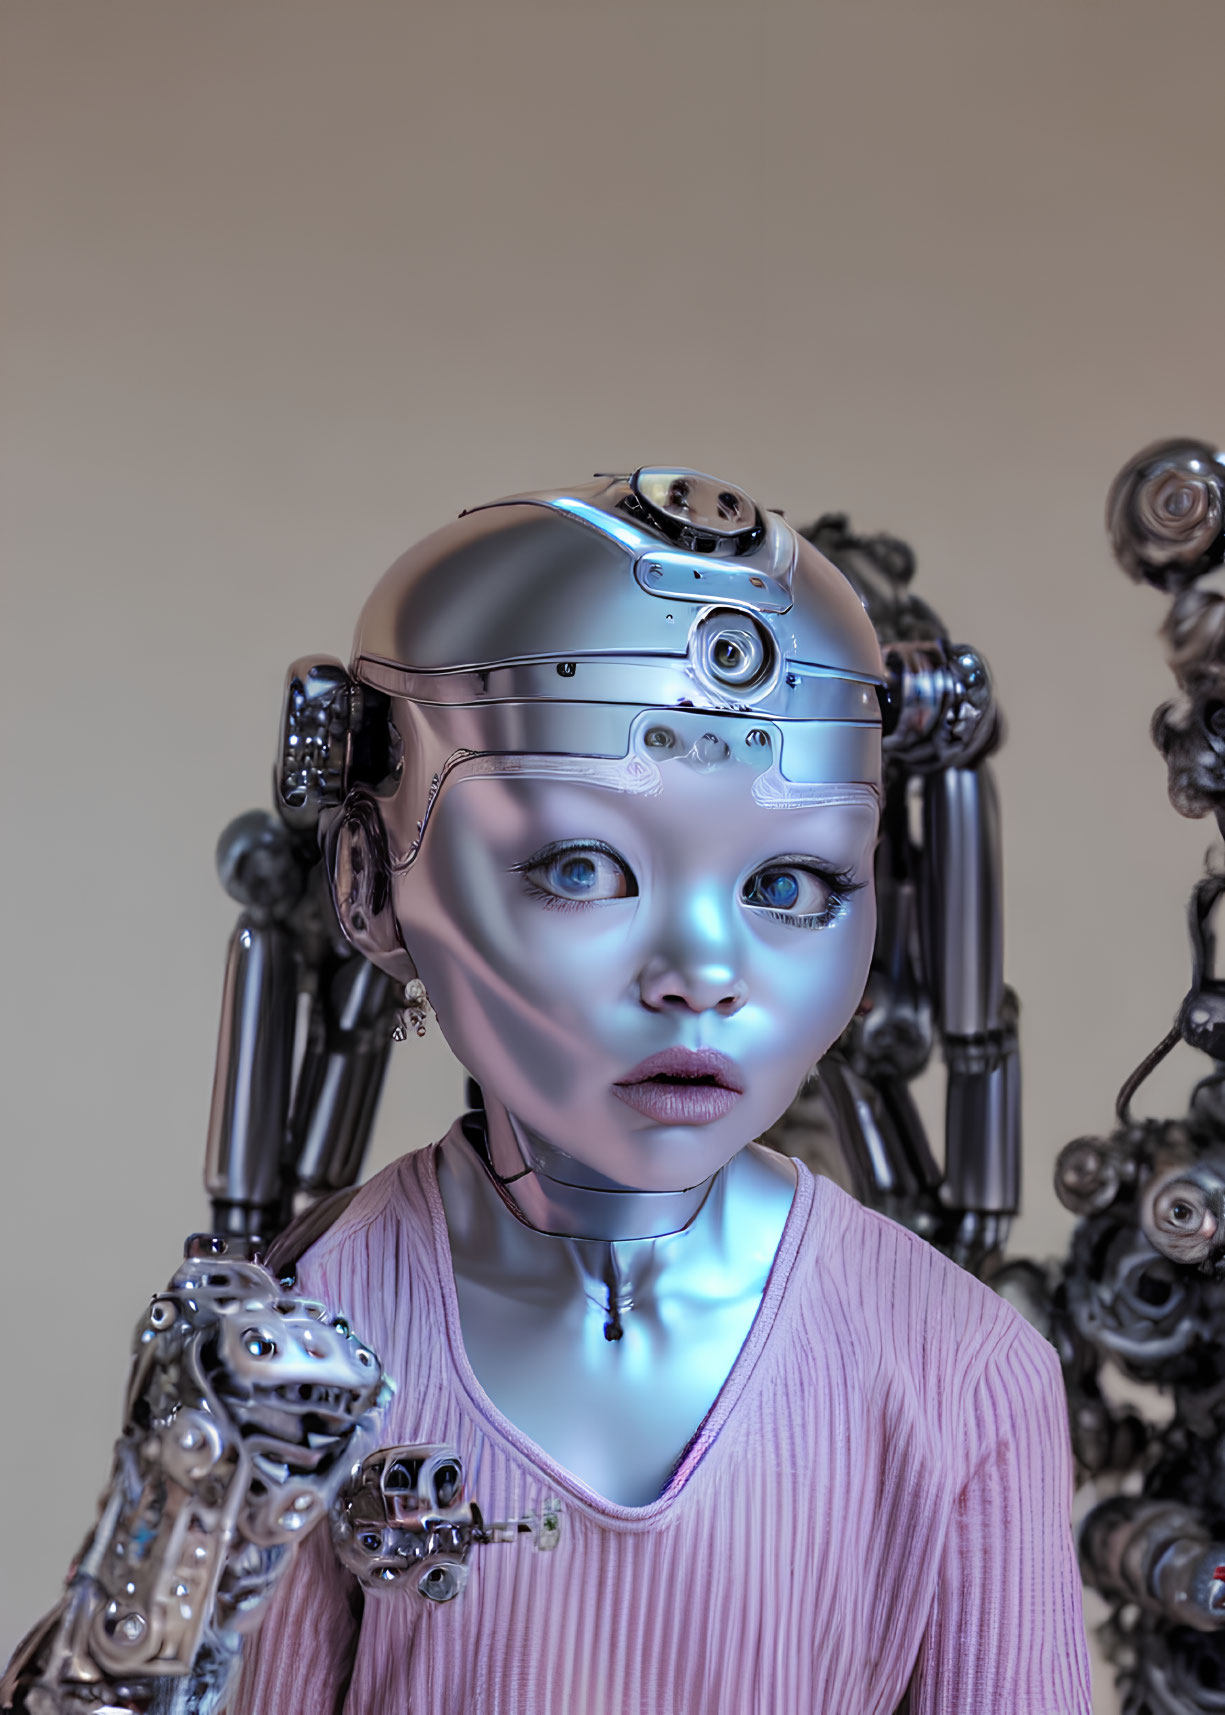 Realistic humanoid robot with detailed mechanical features and lifelike face among similar robotic forms